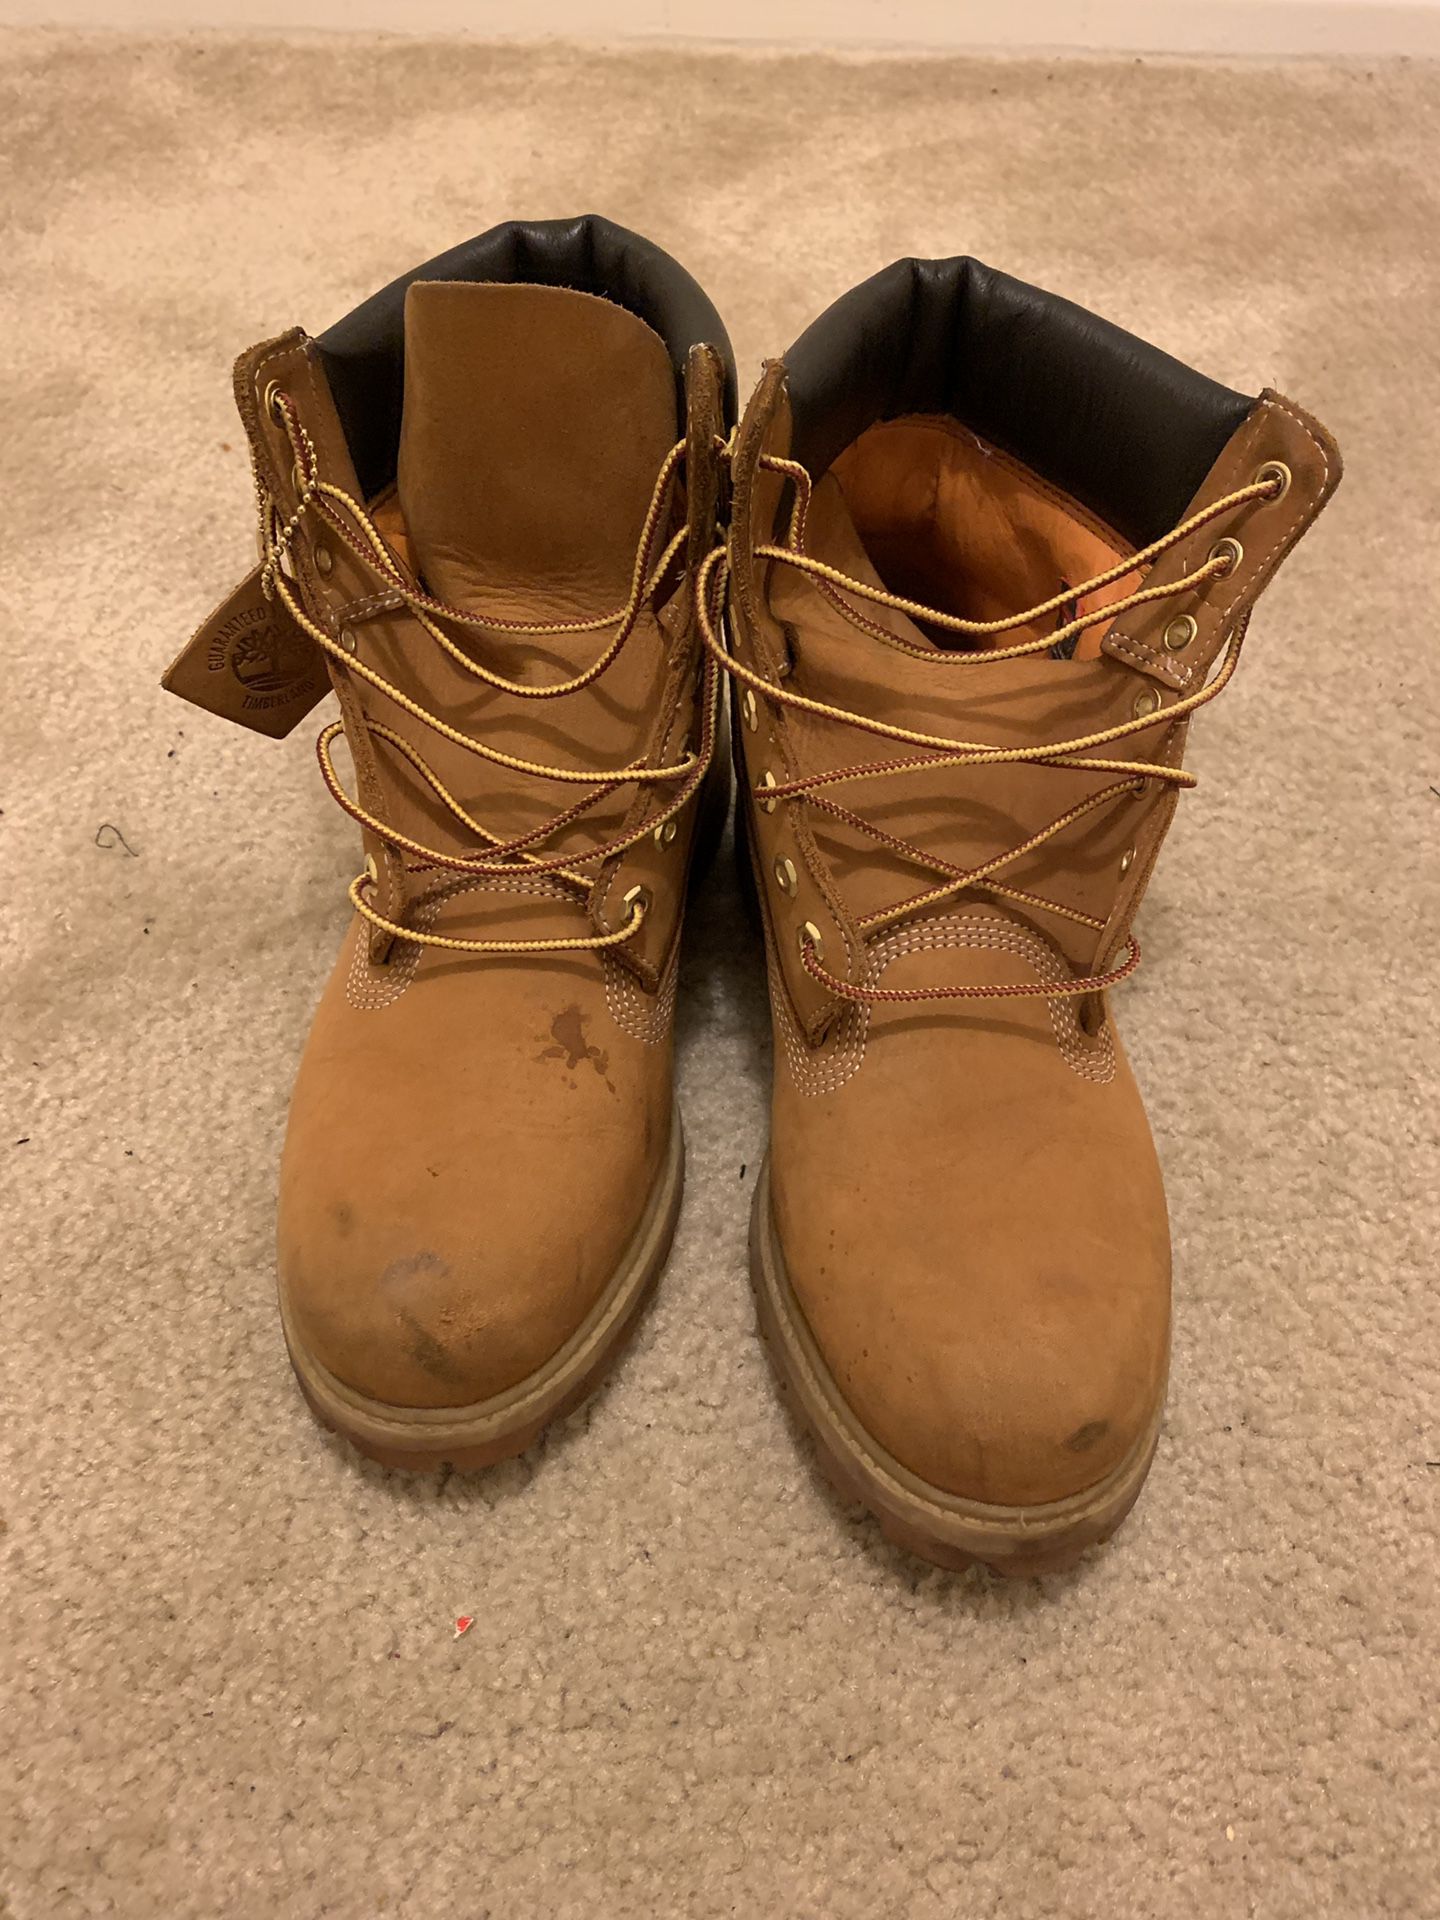 Timberland work boots size 10.5